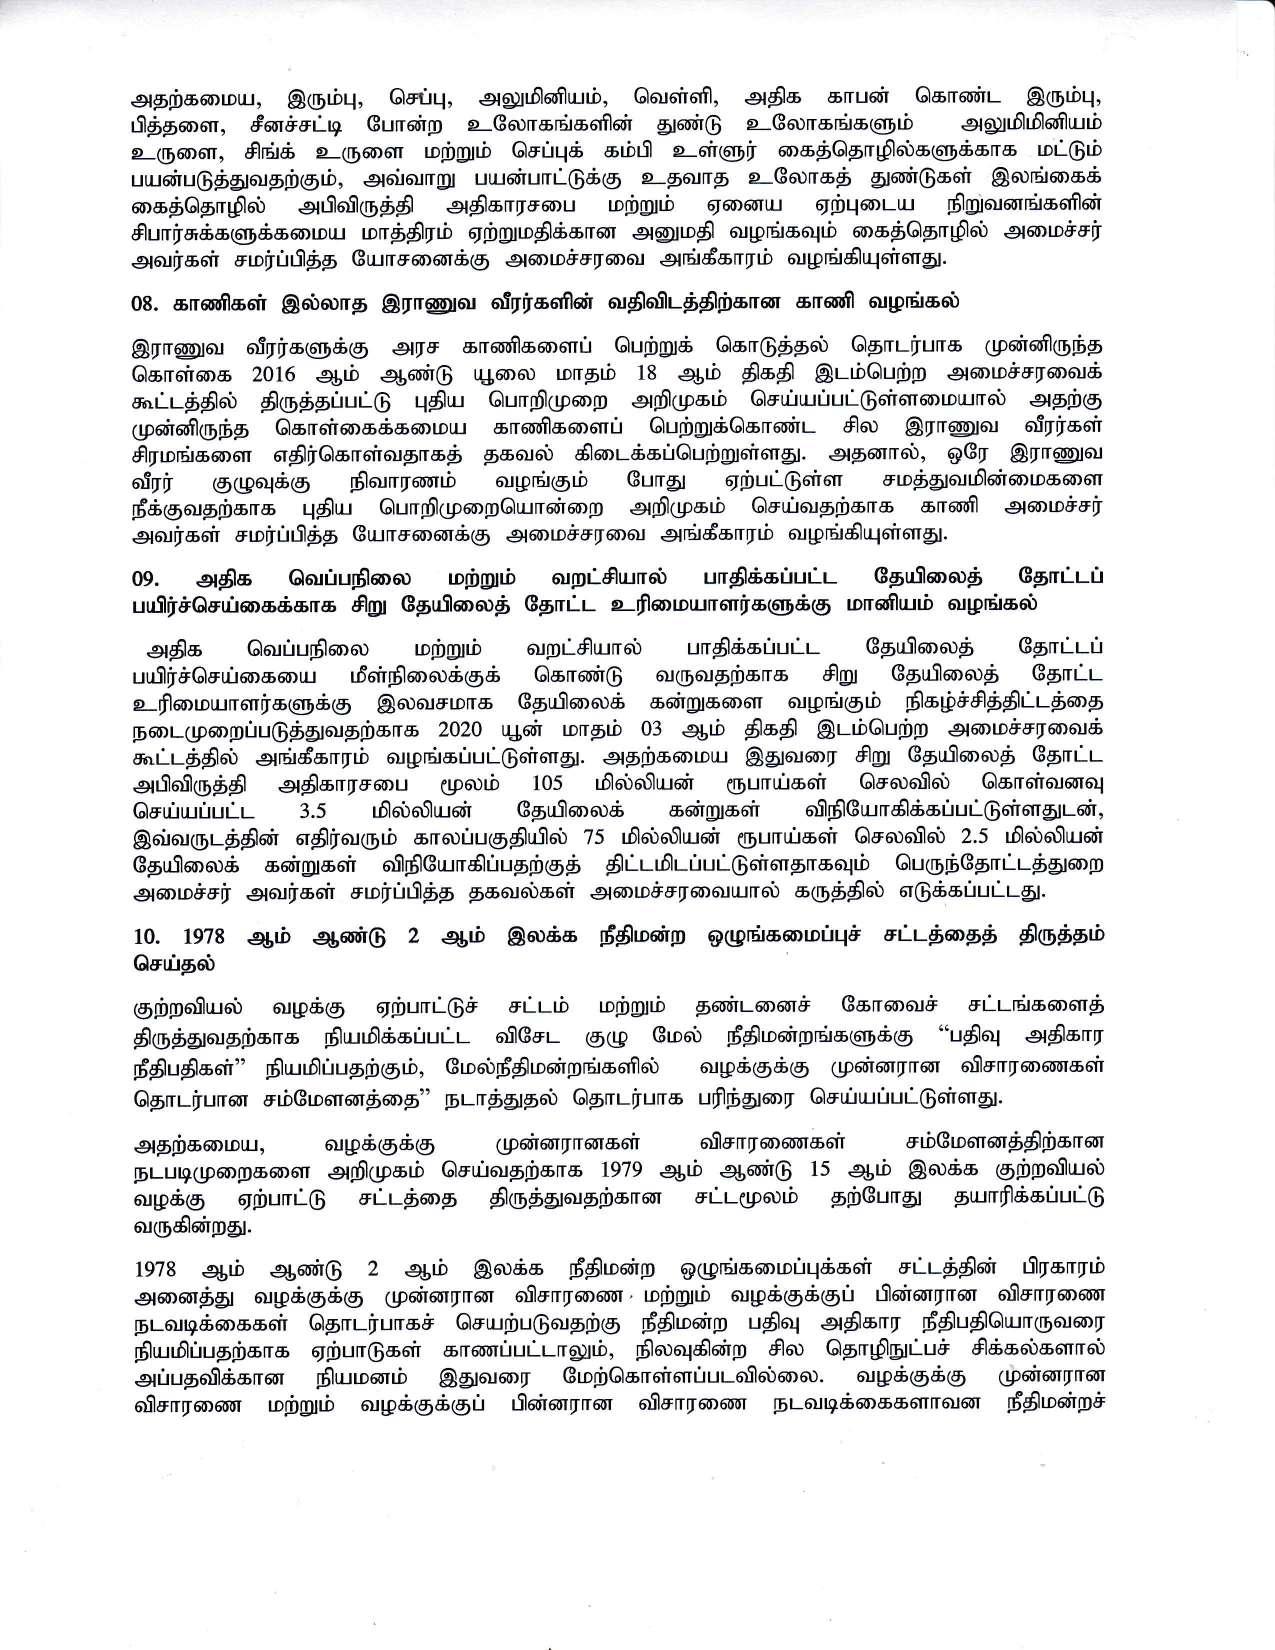 Cabinet Decsion on 09.11.2020 Tamil page 004